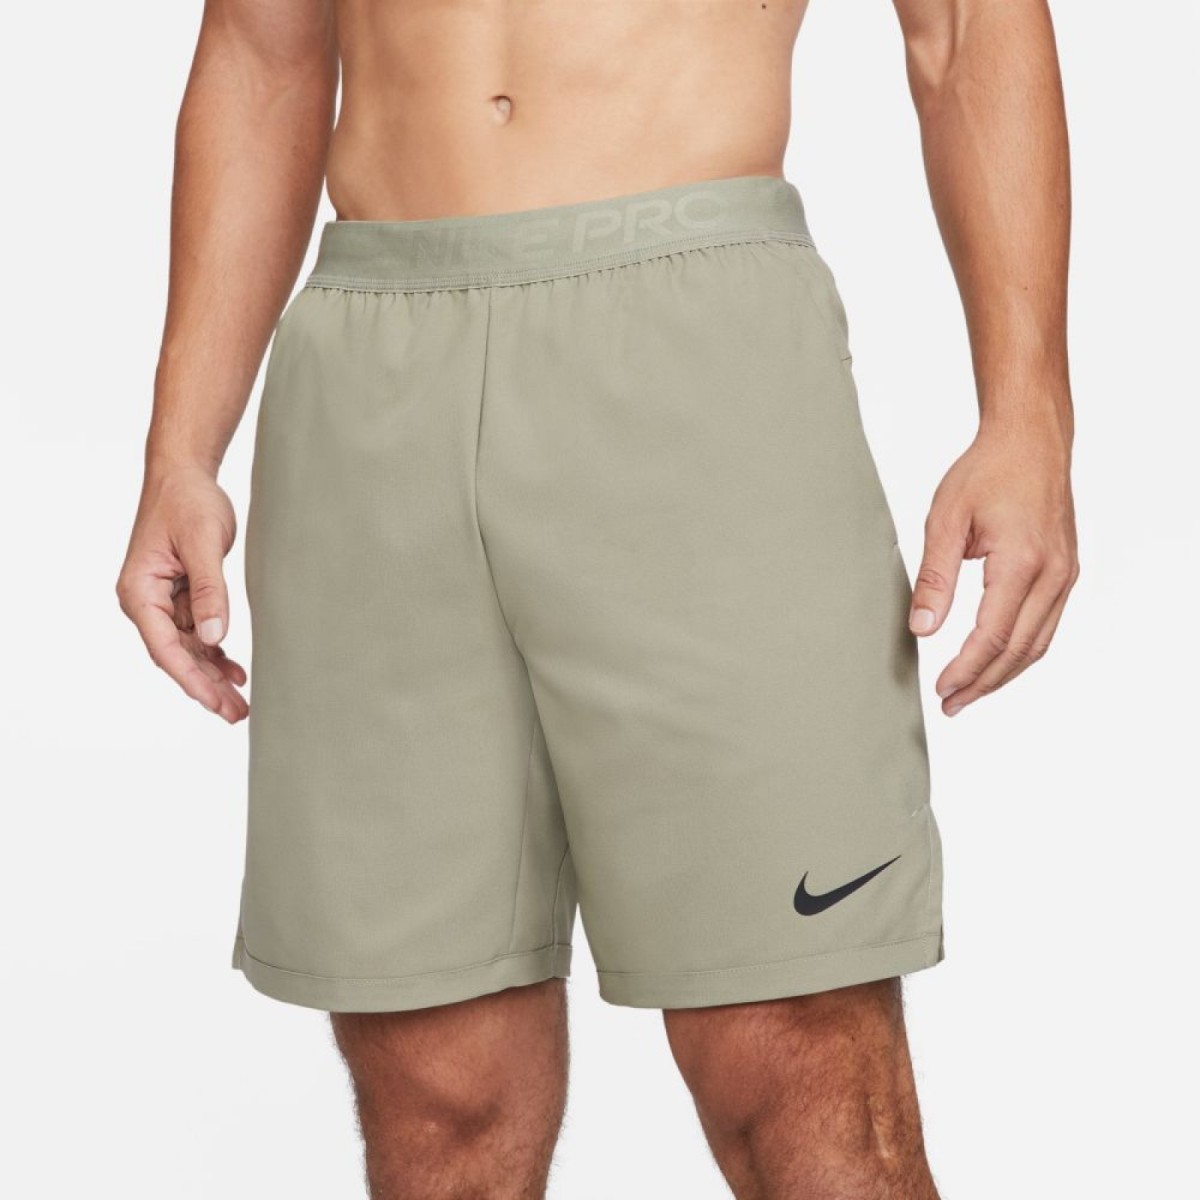 Nike Pro Flex Vent Max Shorts Light Army Green / Black Made with ...